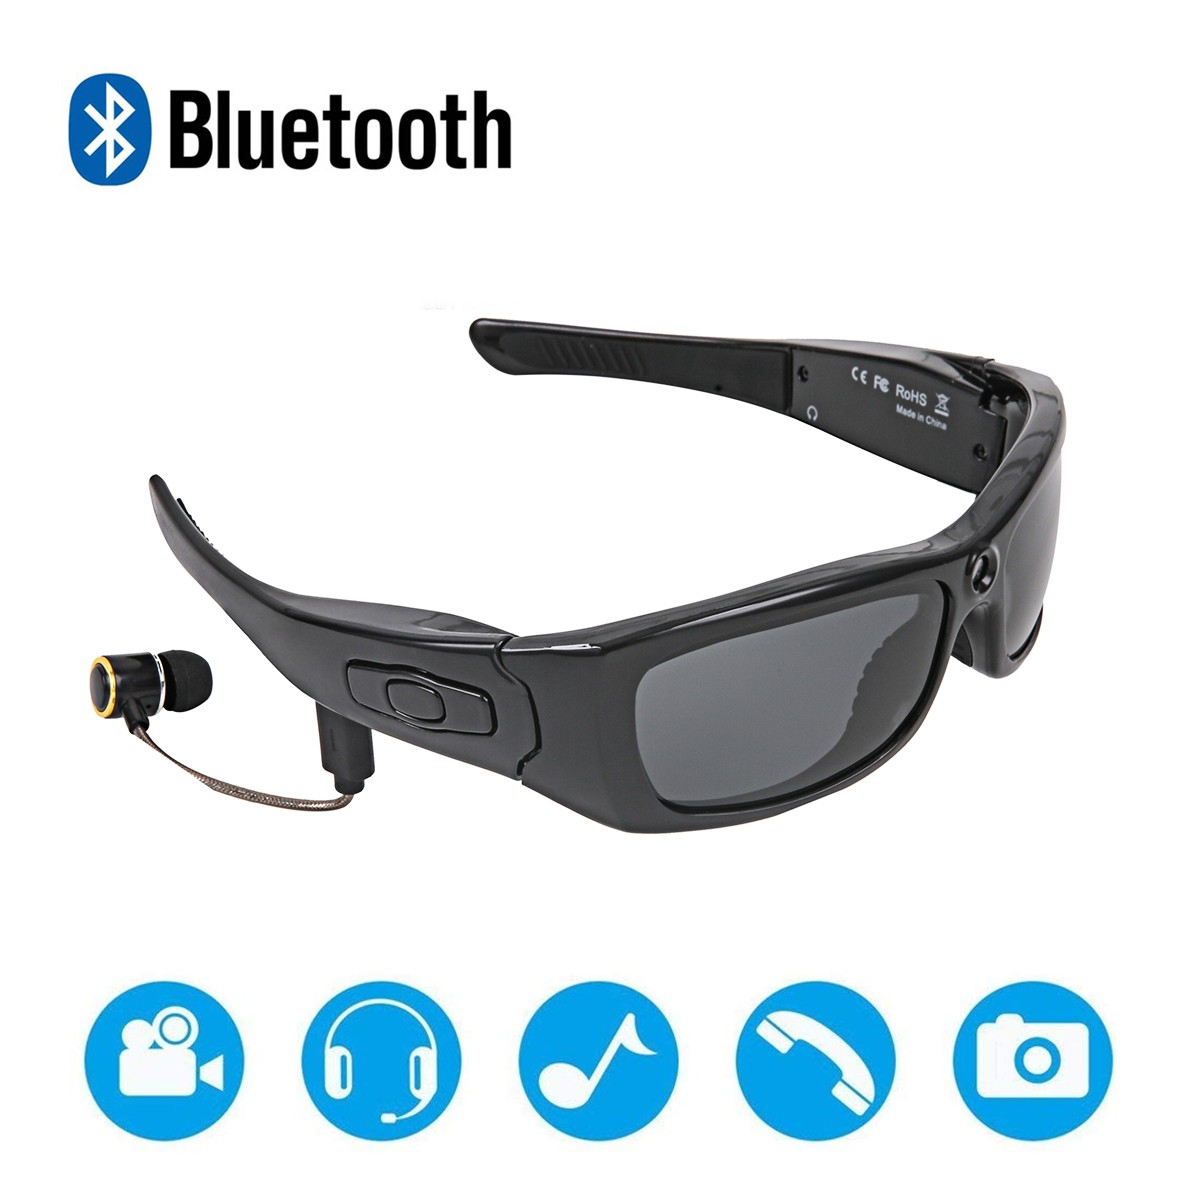 Pengwing-Wireless Hd1080 Electronic Outdoor Bluetooth Smart Glasses-1